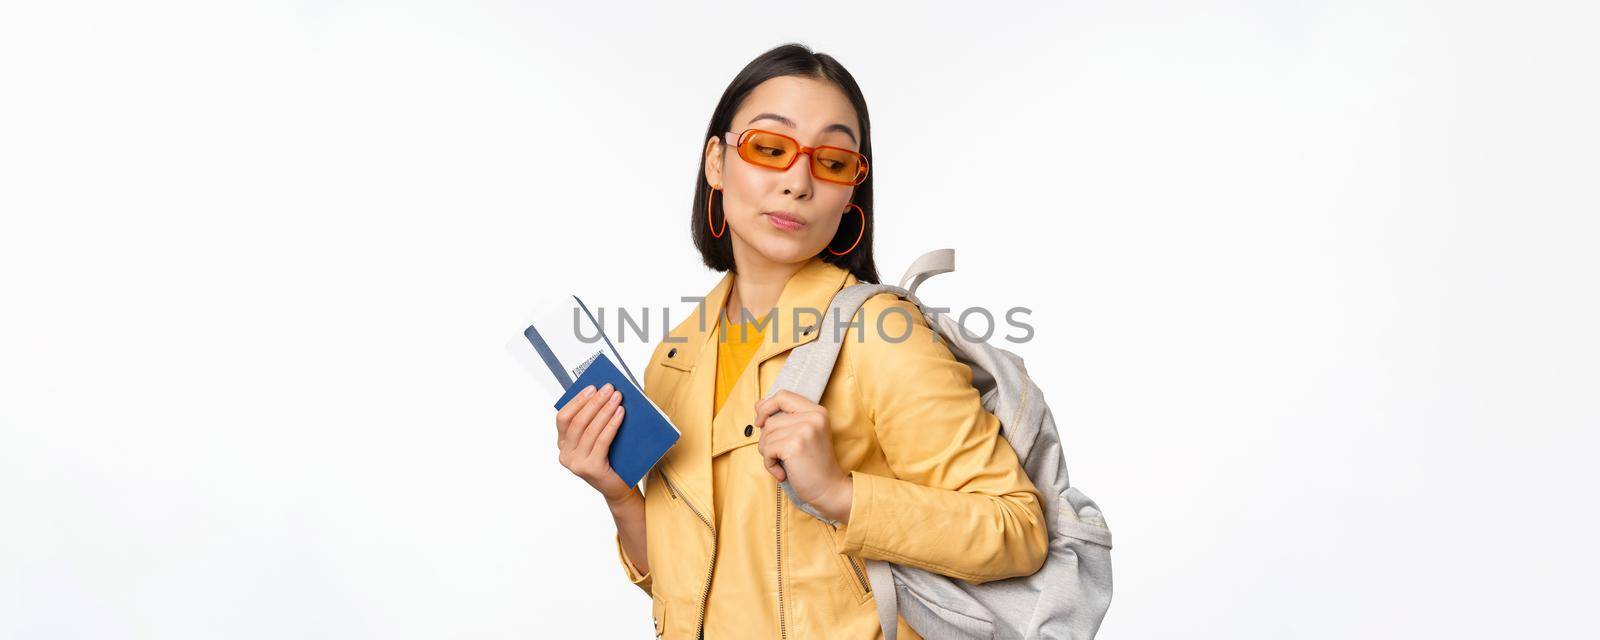 Stylish asian woman in sunglasses going abroad with backpack, tourist holding passport and flight boarding tickets, standing over white background. Copy space